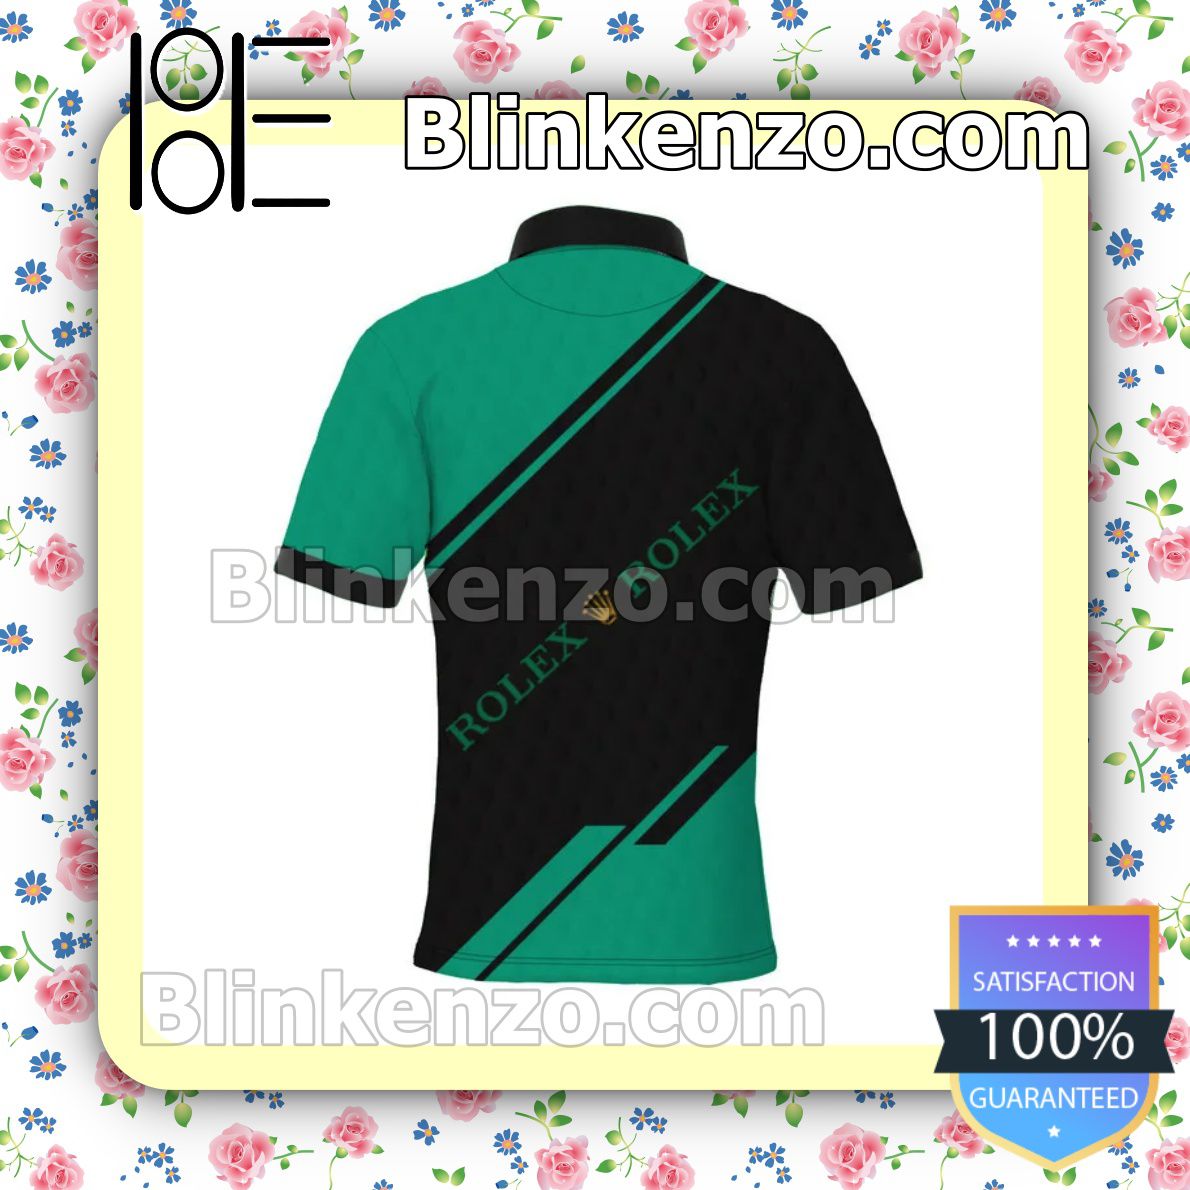 Print On Demand Personalized Rolex Masters Tournament Black And Green Custom Polo Shirt